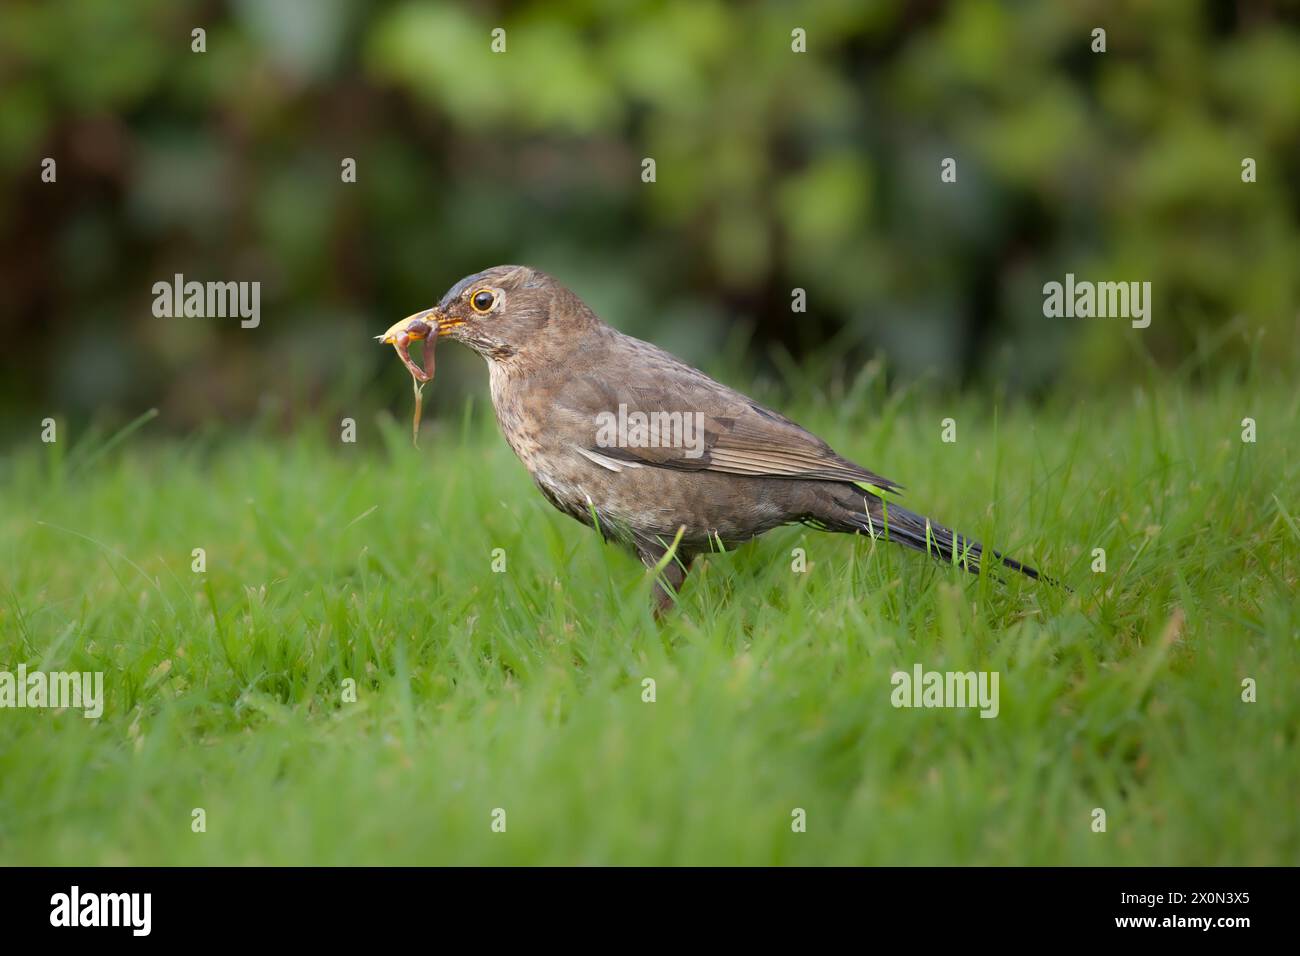 A female Blackbird on green lawn with worms in mouth Stock Photo